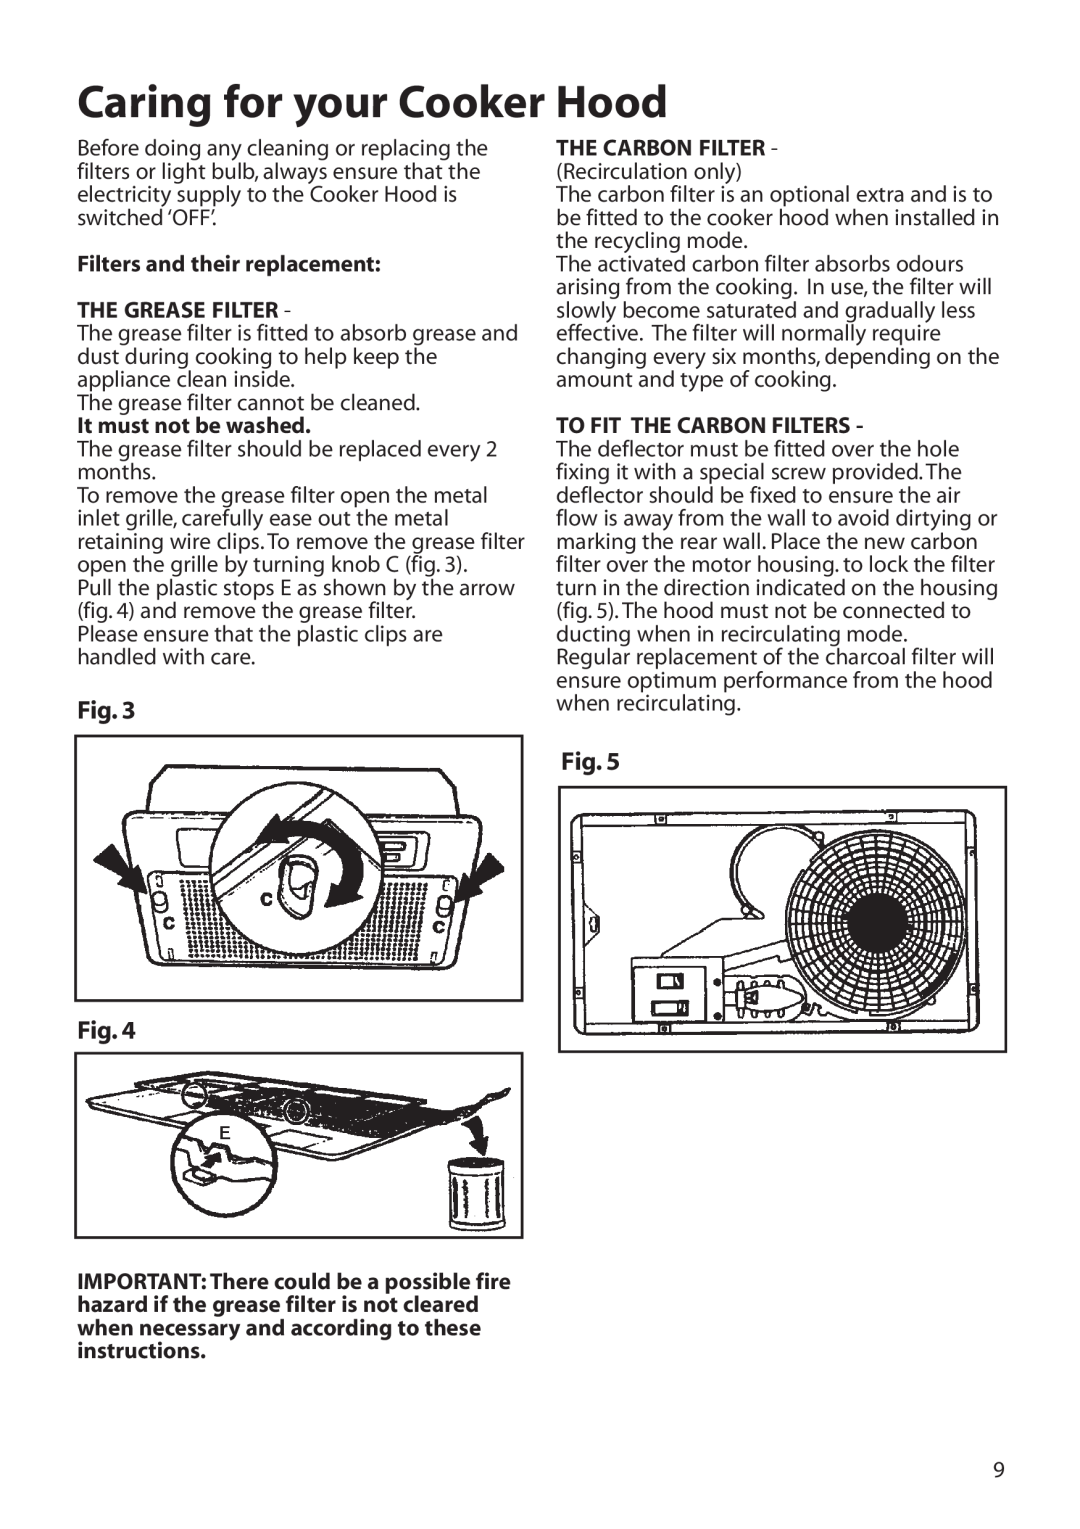 Hotpoint HTU30 manual Caring for your Cooker Hood, Filters and their replacement THE GREASE FILTER, It must not be washed 